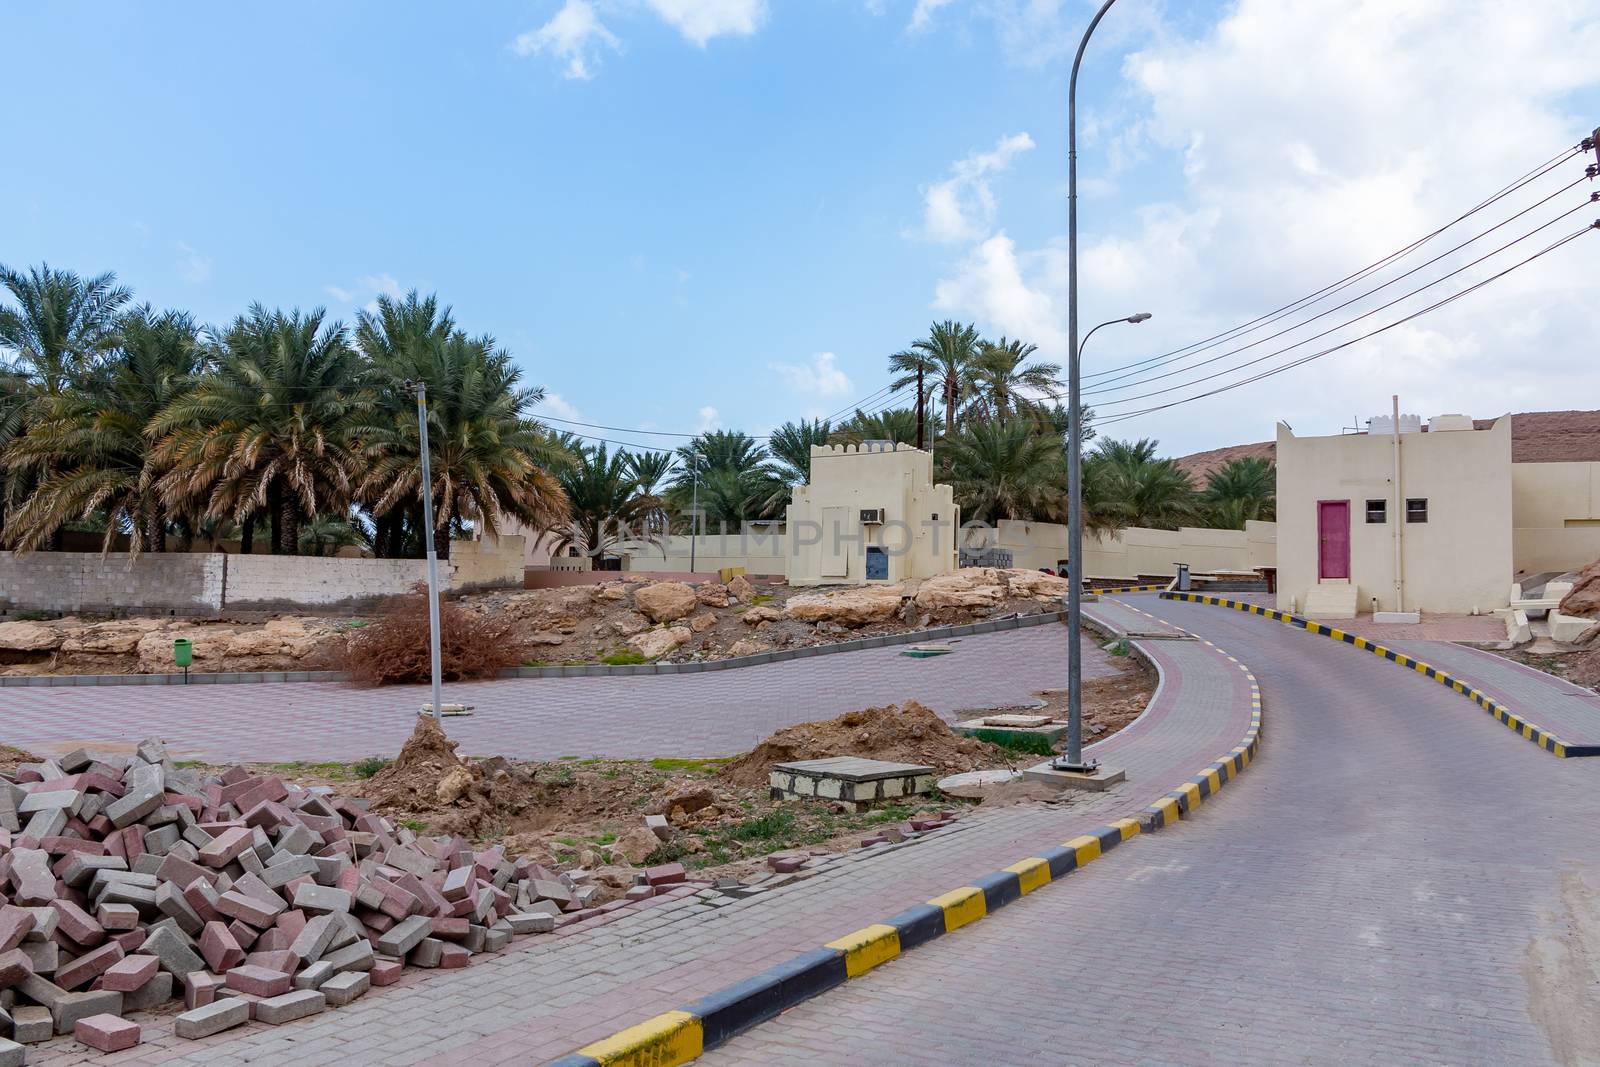 Landscape paving works in a village in Oman by galsand